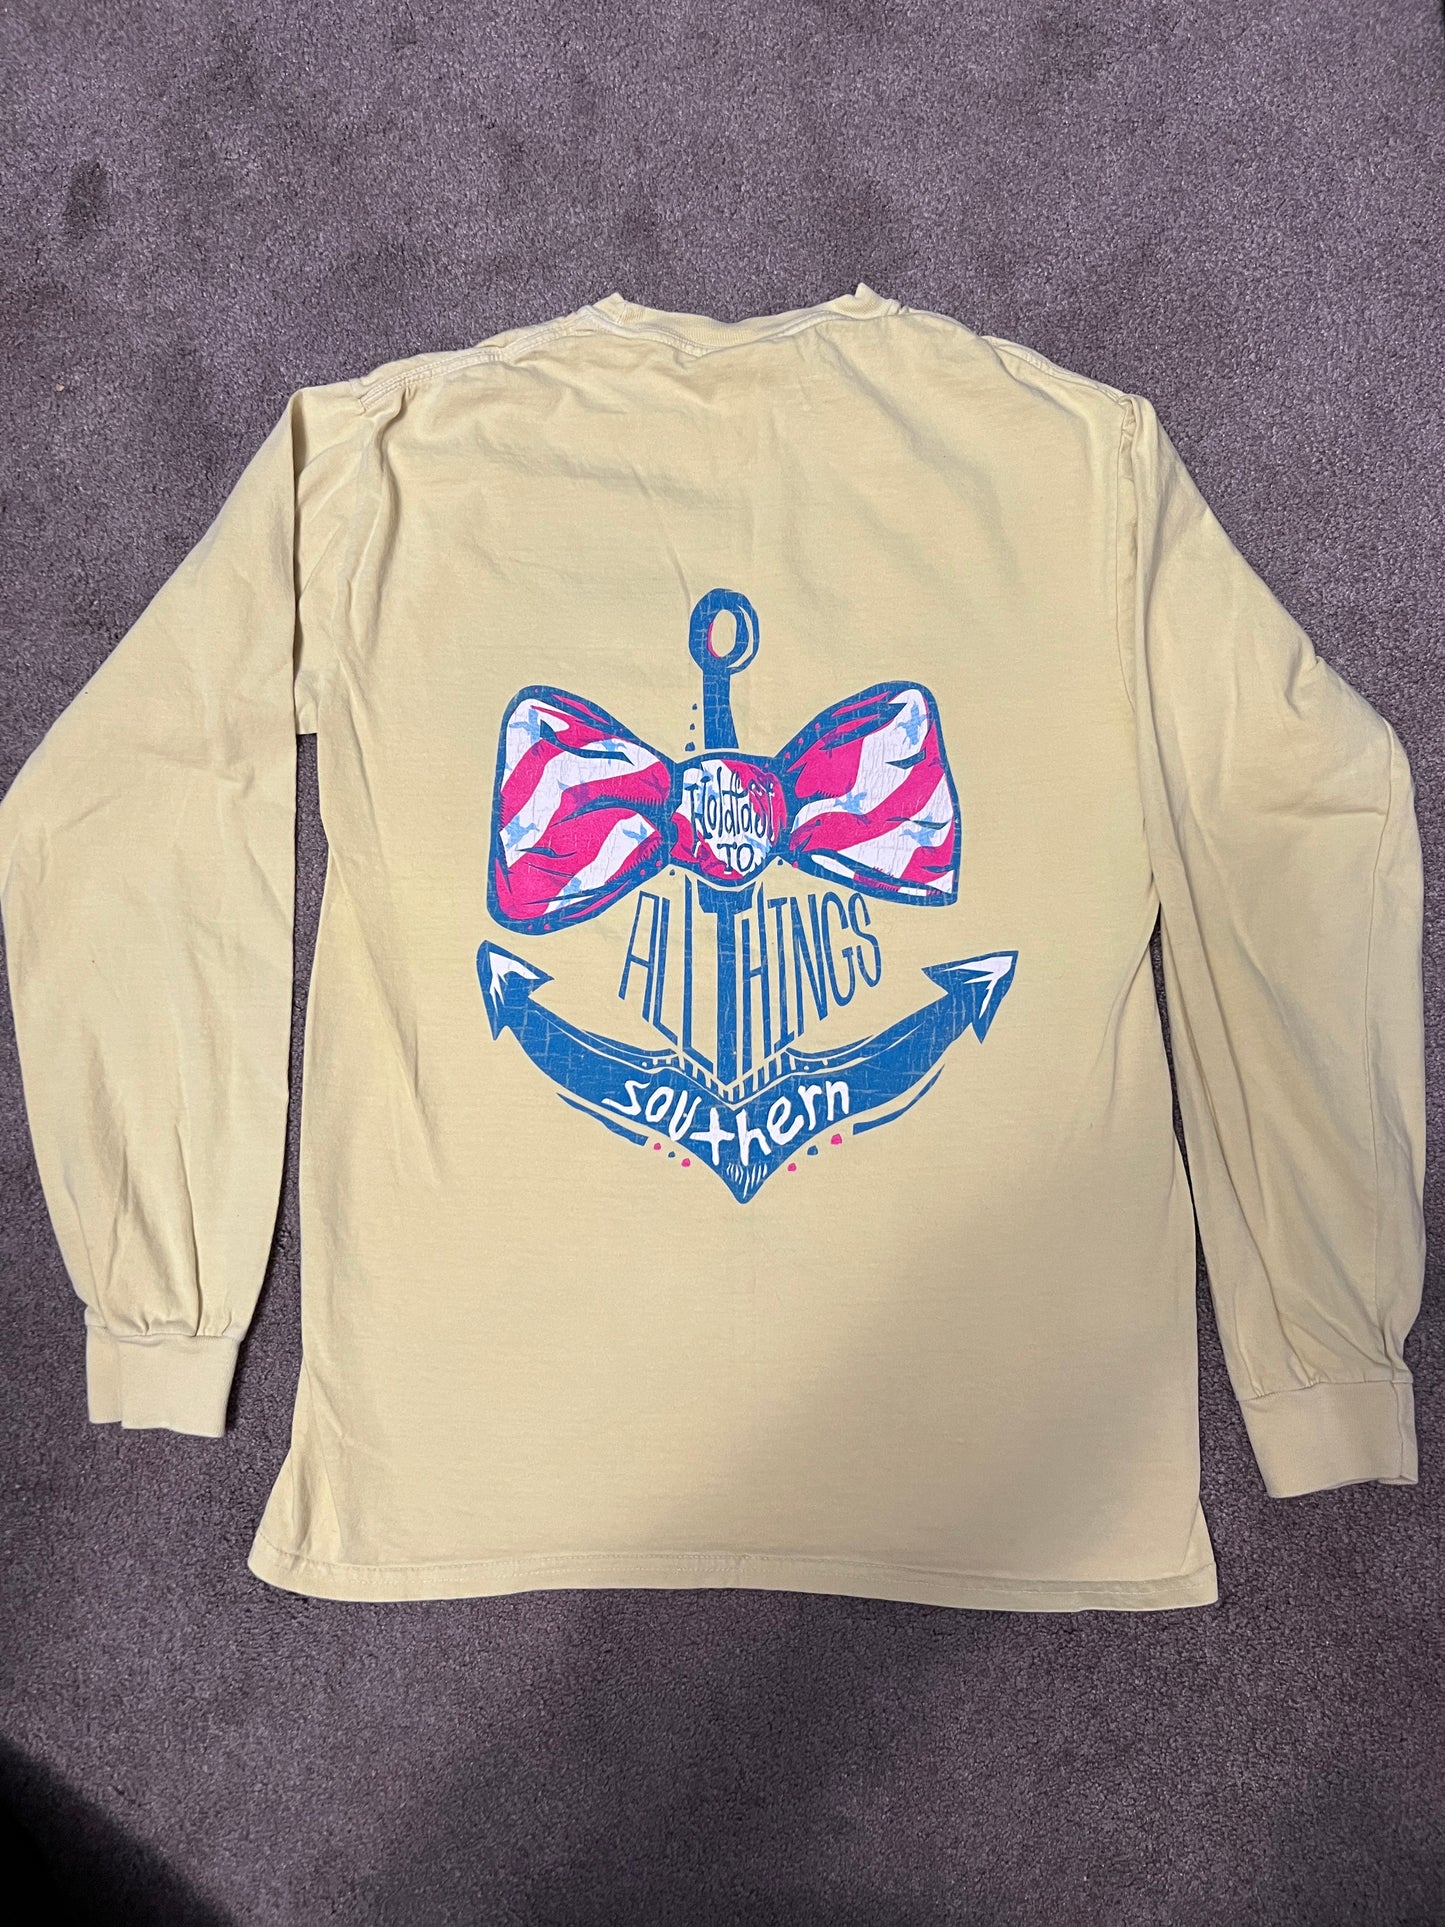 Women’s S Southern Fried Cotton Comfort Colors long sleeve tee- PPU 45044 (Liberty Twp)